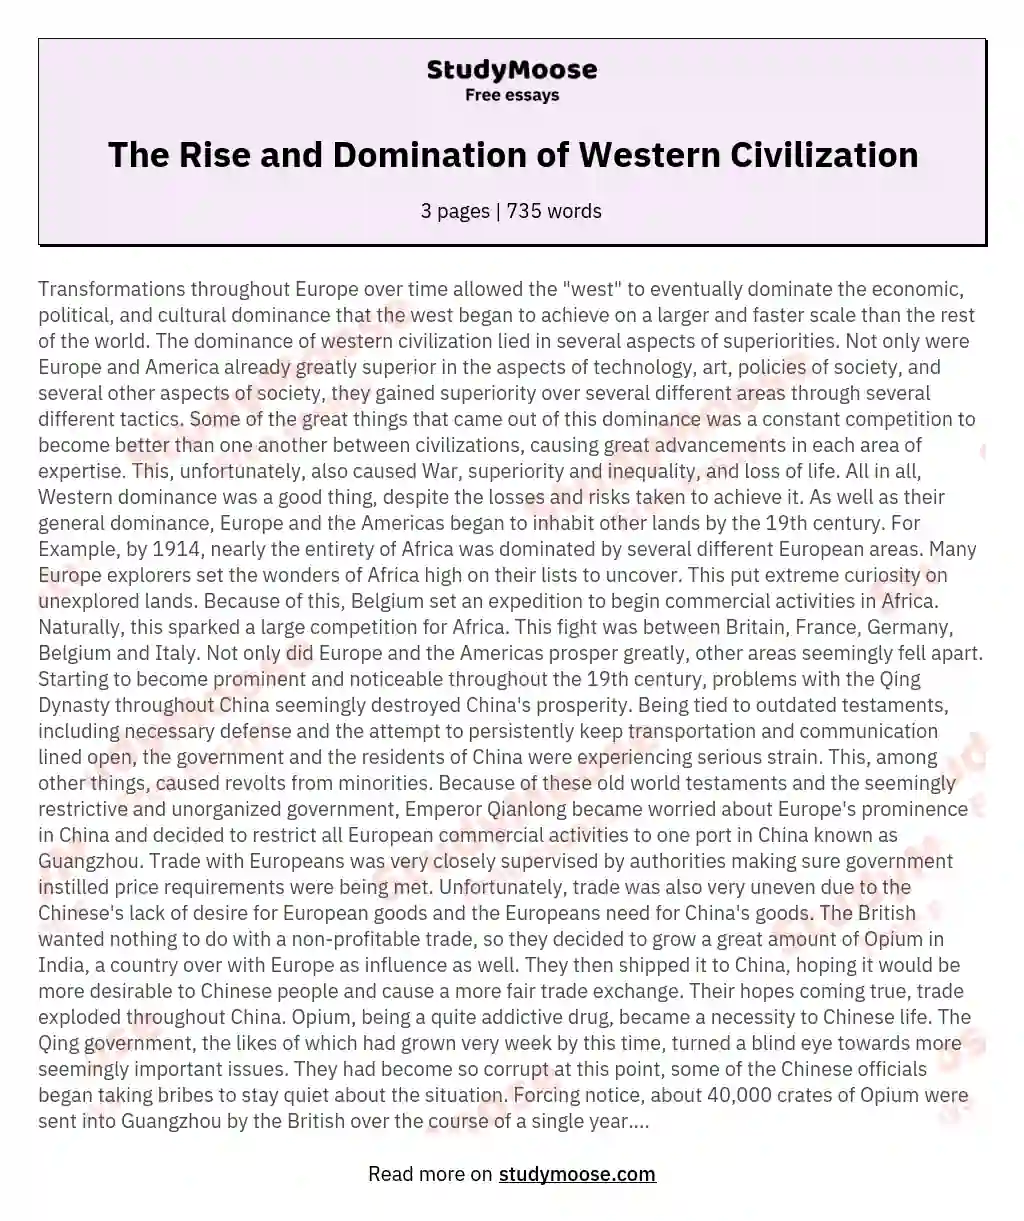 The Rise and Domination of Western Civilization essay